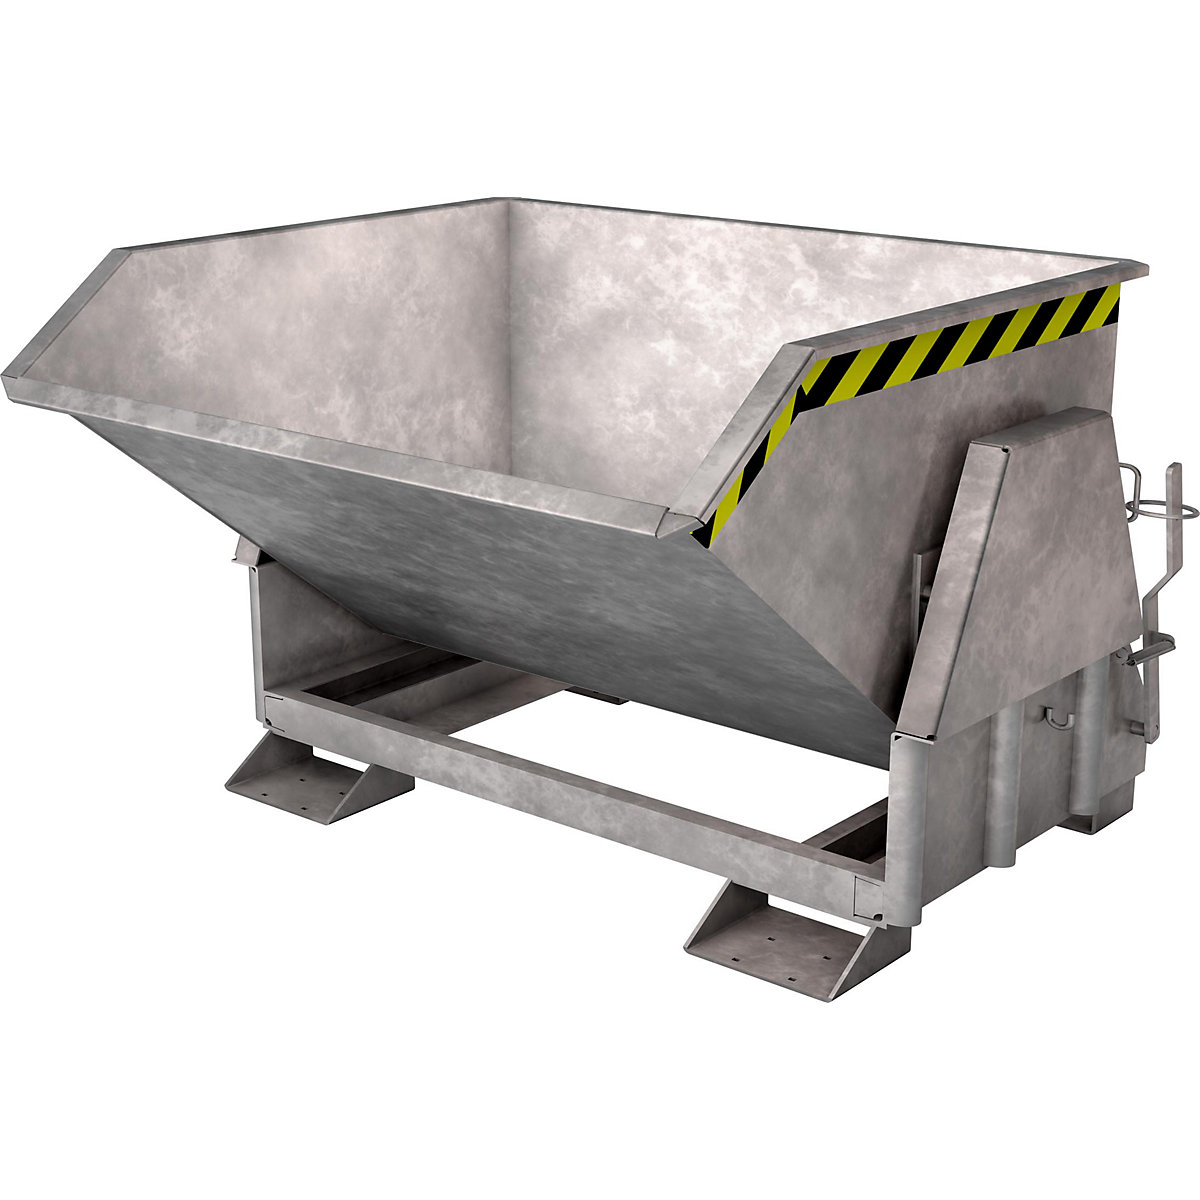 Tilting skip, standard overall height, without wheels – eurokraft pro, capacity 1.5 m³, hot dip galvanised-9